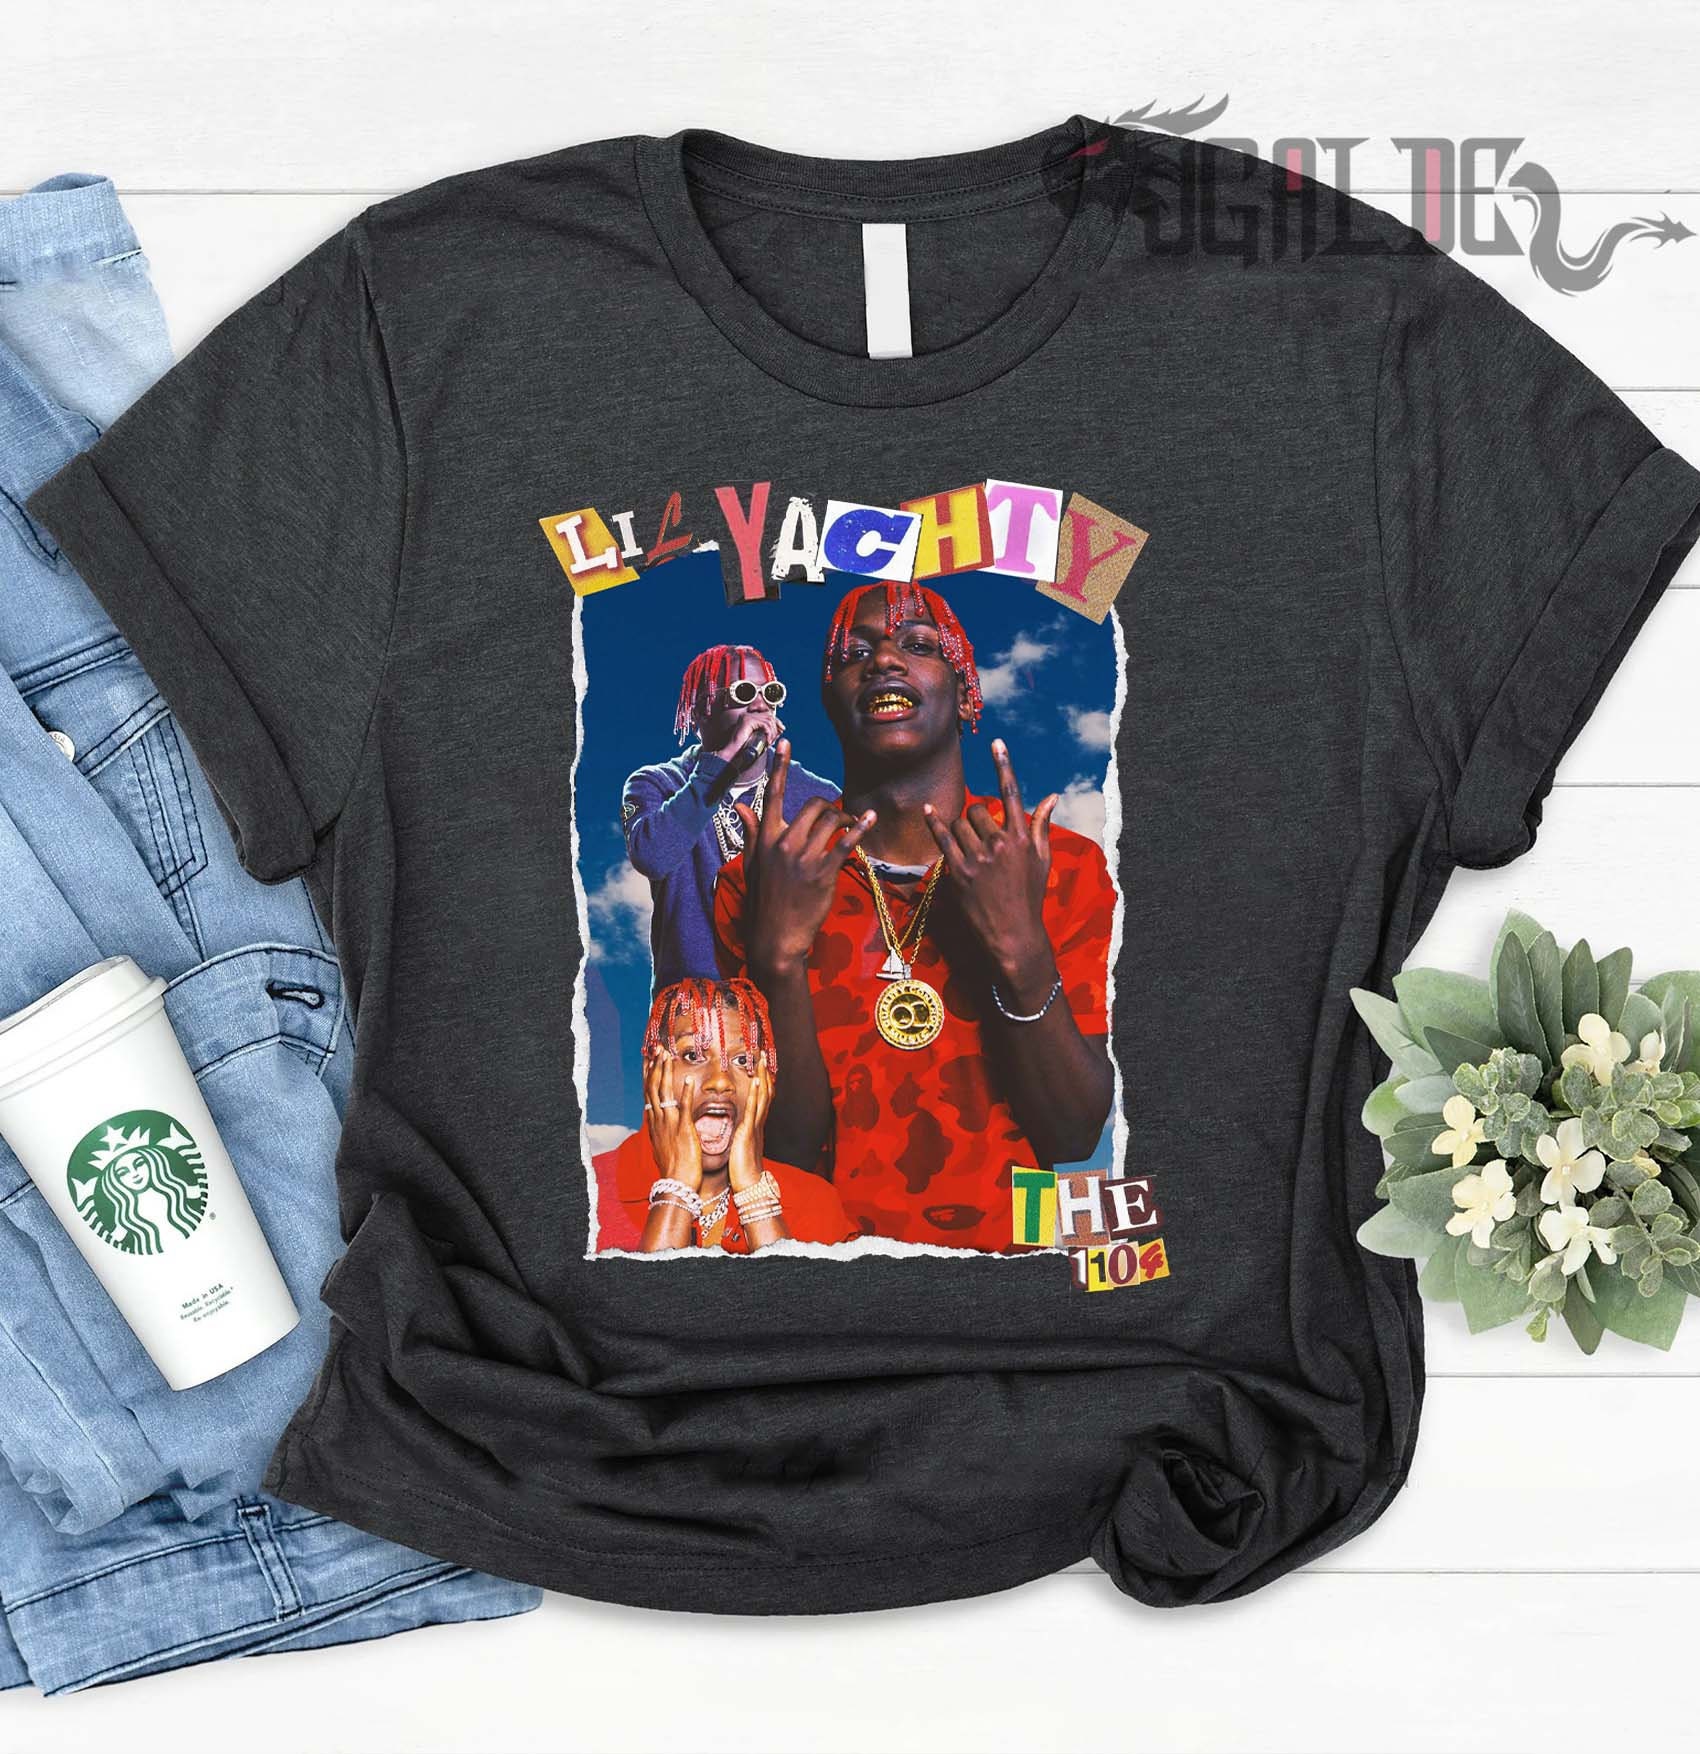 Discover Lil Yachty Vintage 90s Raptee Shirt